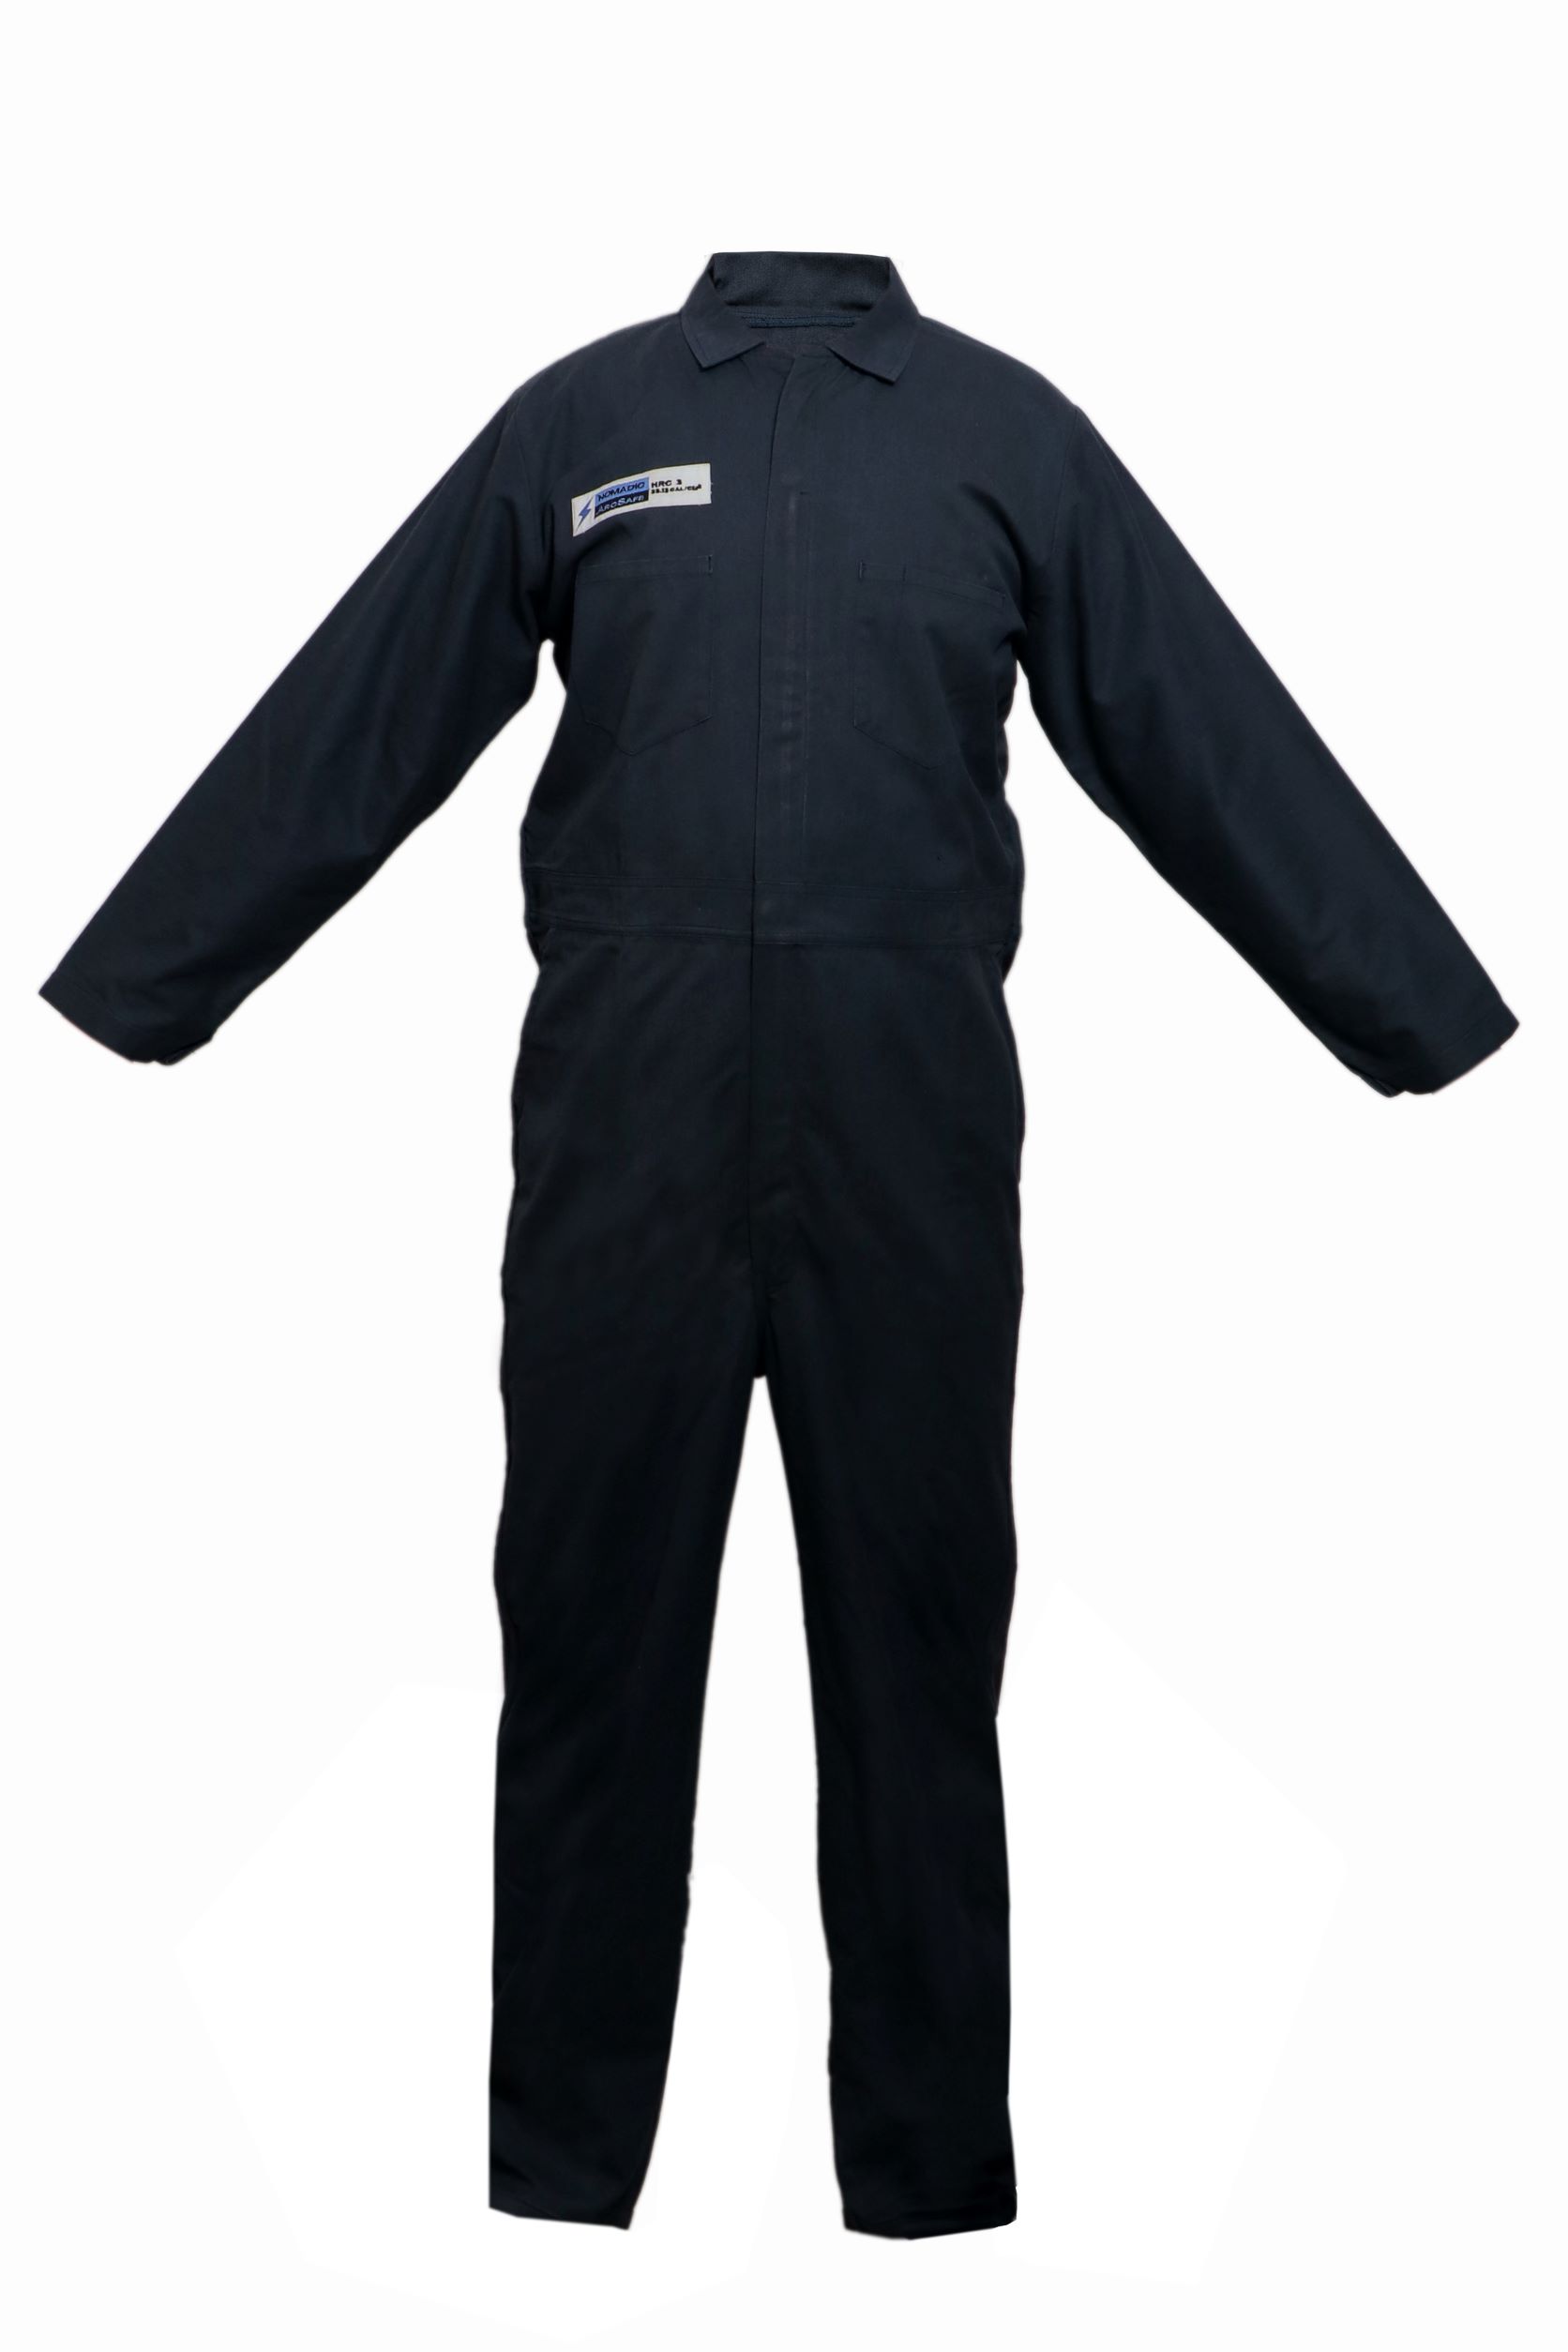 INHERENT FR PRO HRC 3 COVERALL